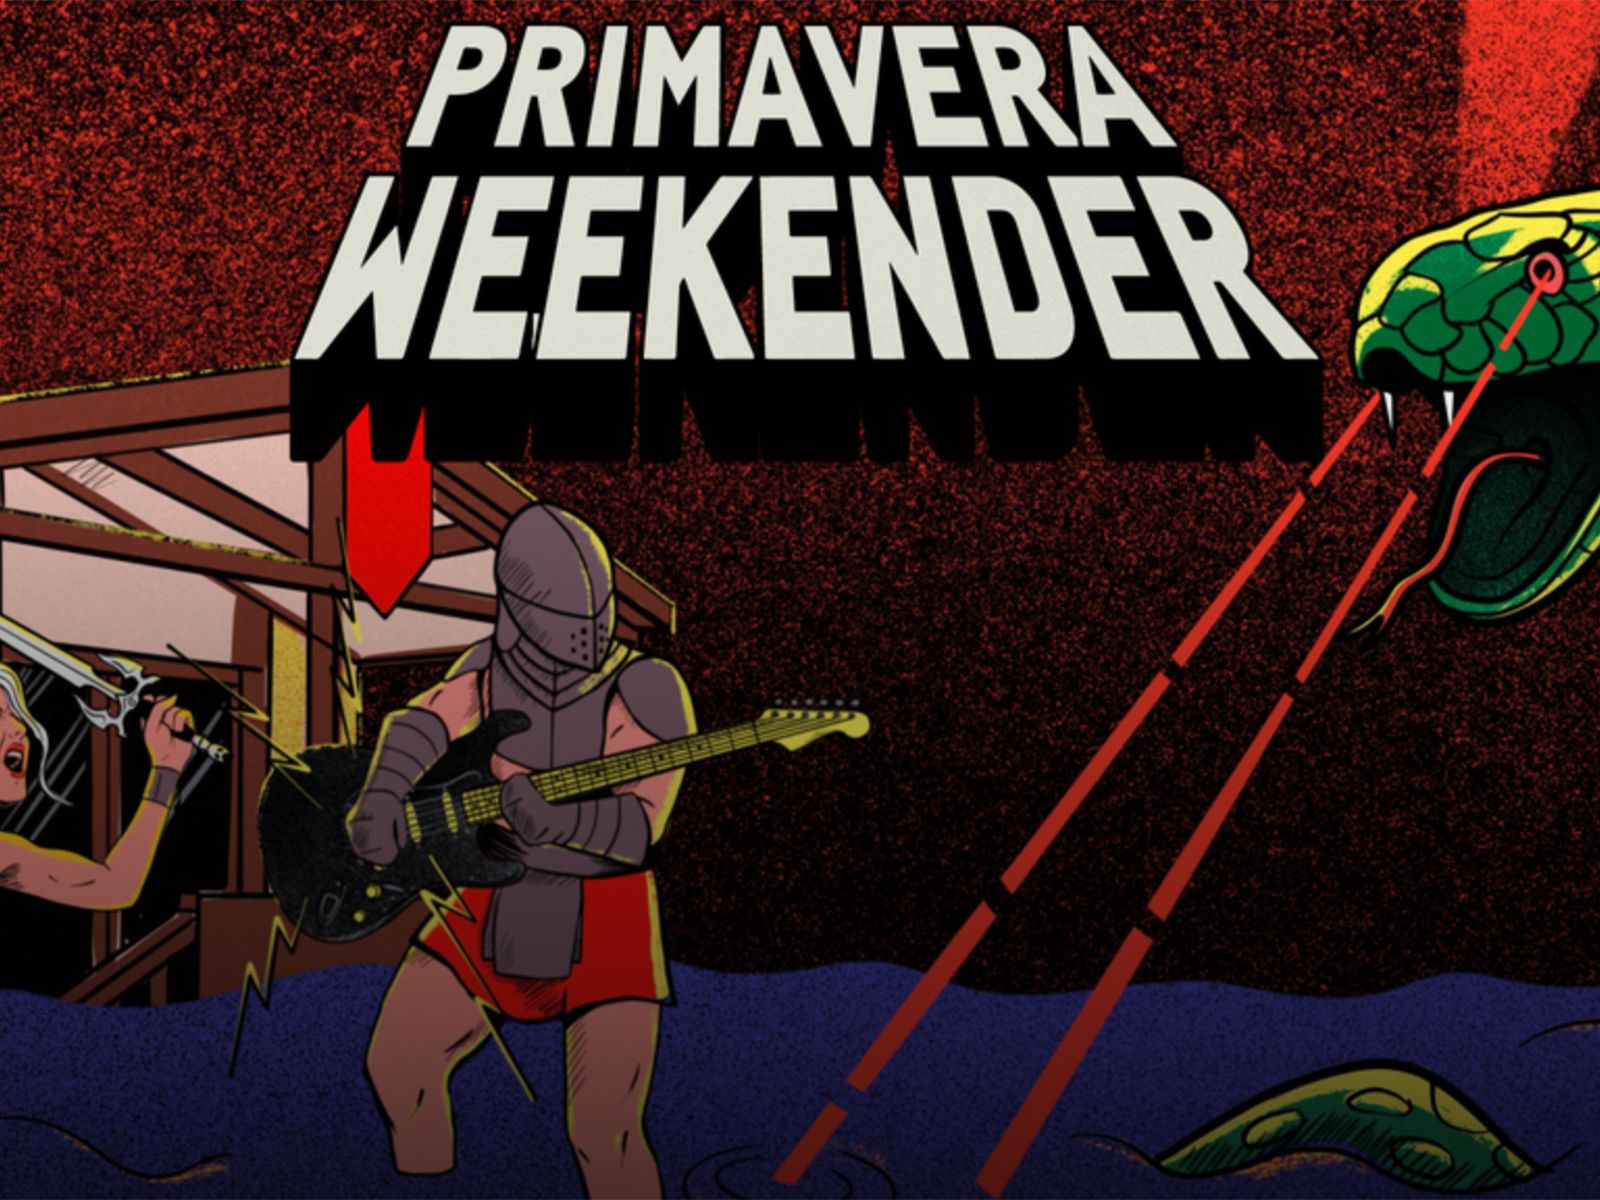 Primavera Weekender: Discover the line-up and get your tickets